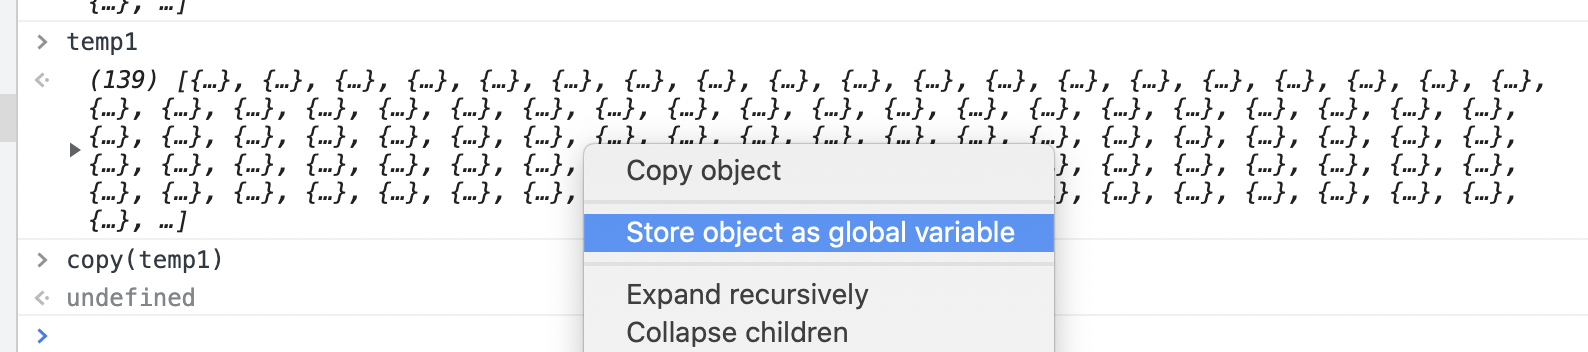 store-as-global-variable.png